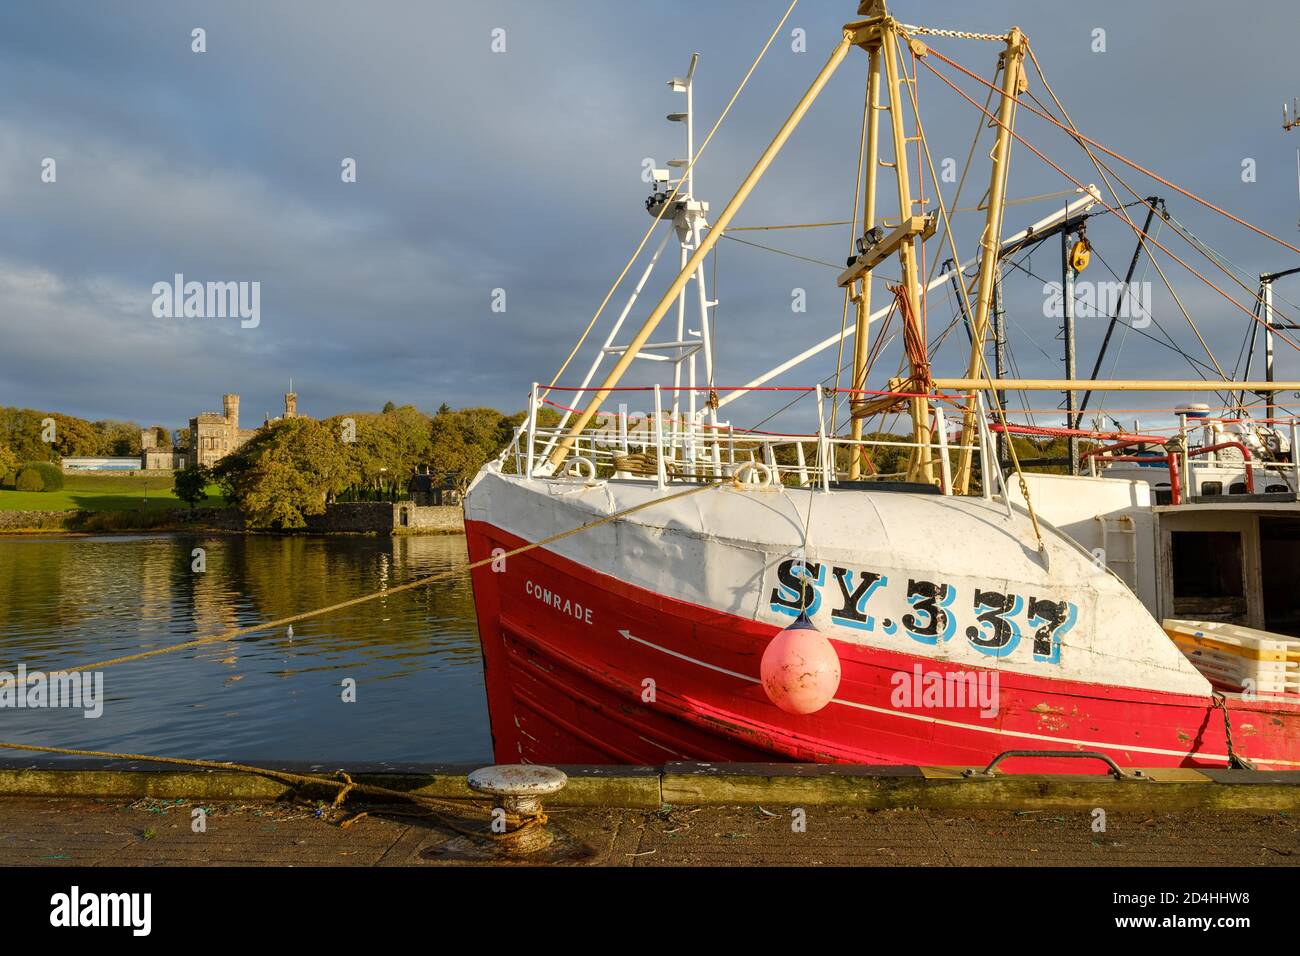 The Stornoway fishing boat ‘Comrade’, SY337, moored in the inner harbour. Stock Photo